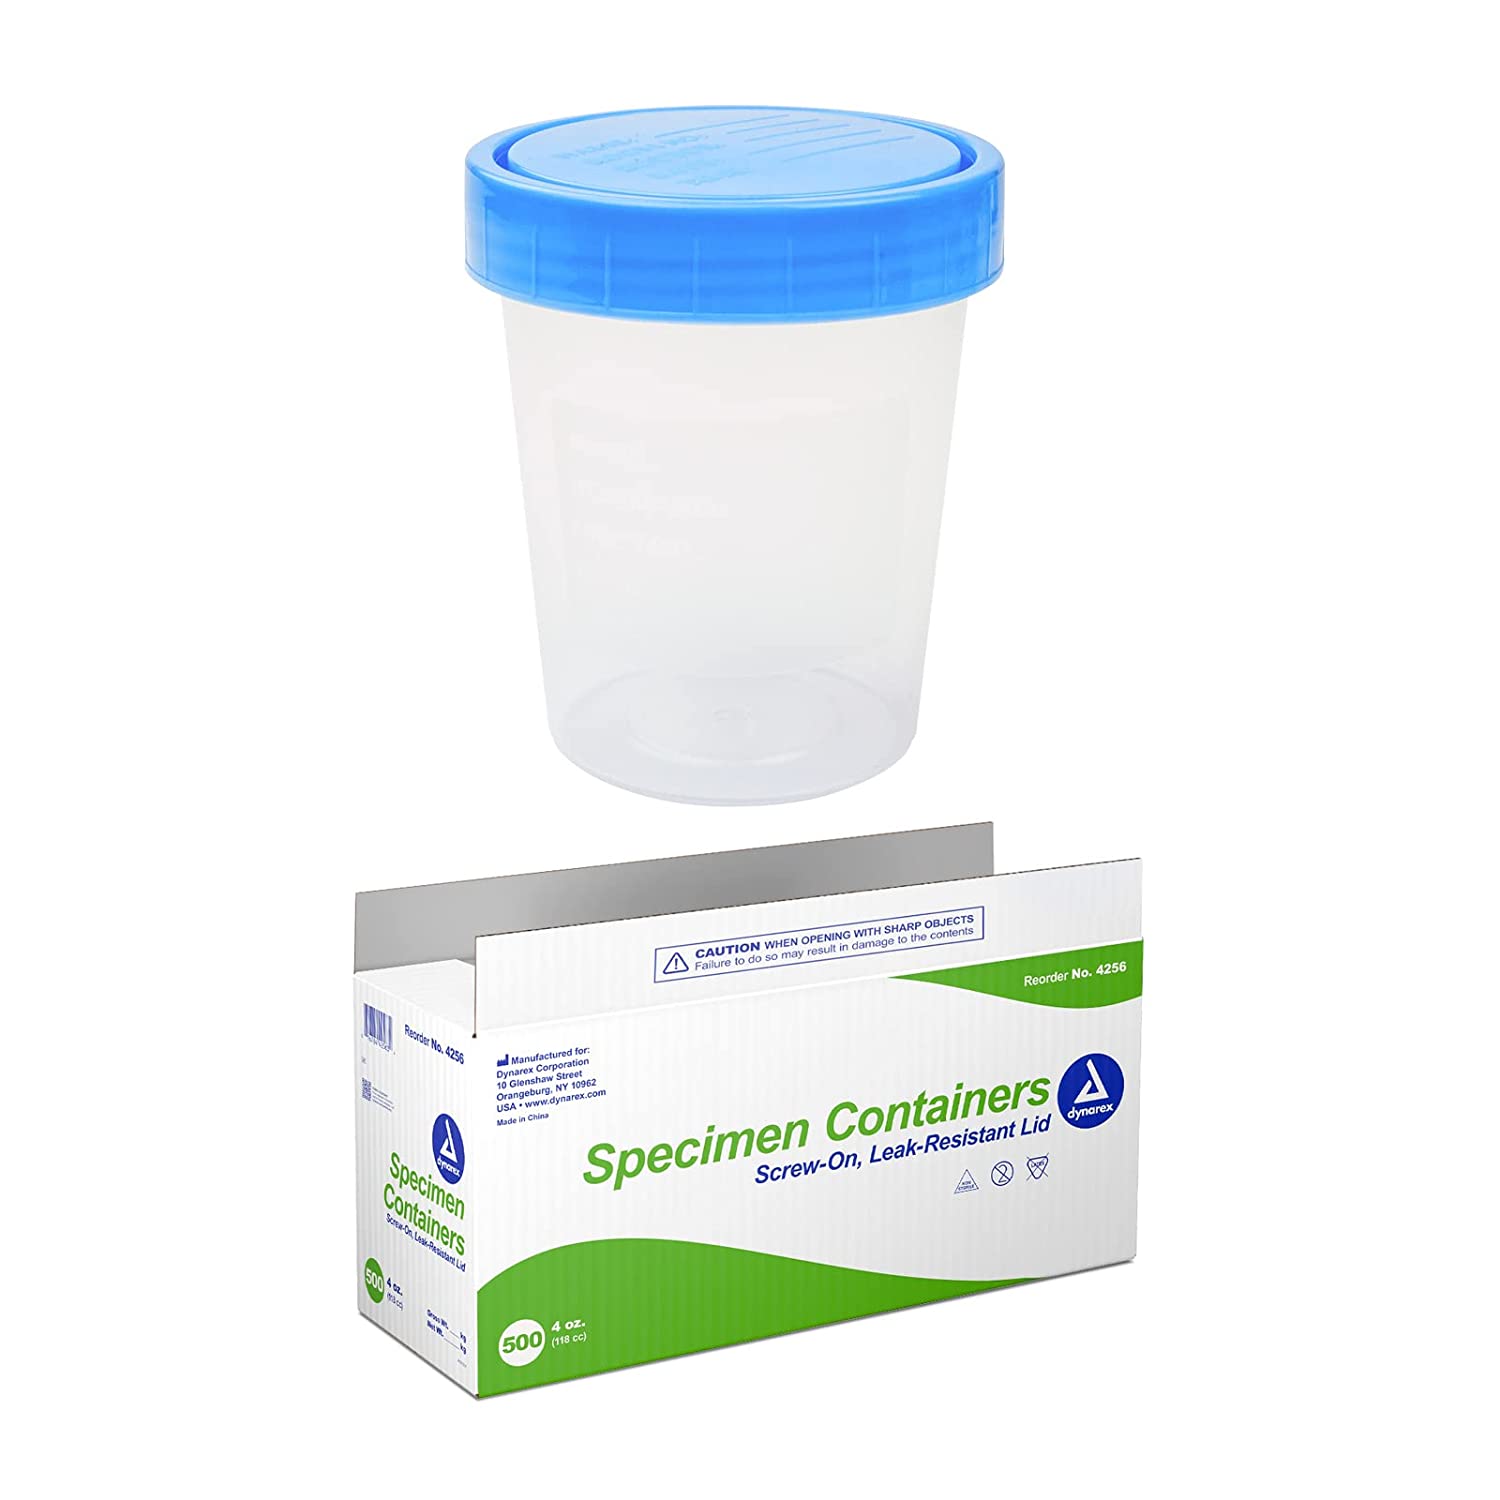 Dynarex Specimen Containers, Non-Sterile, Bulk Packaged Specimen Cups with Lids, Clear with Blue Lid, 1 Box of 500